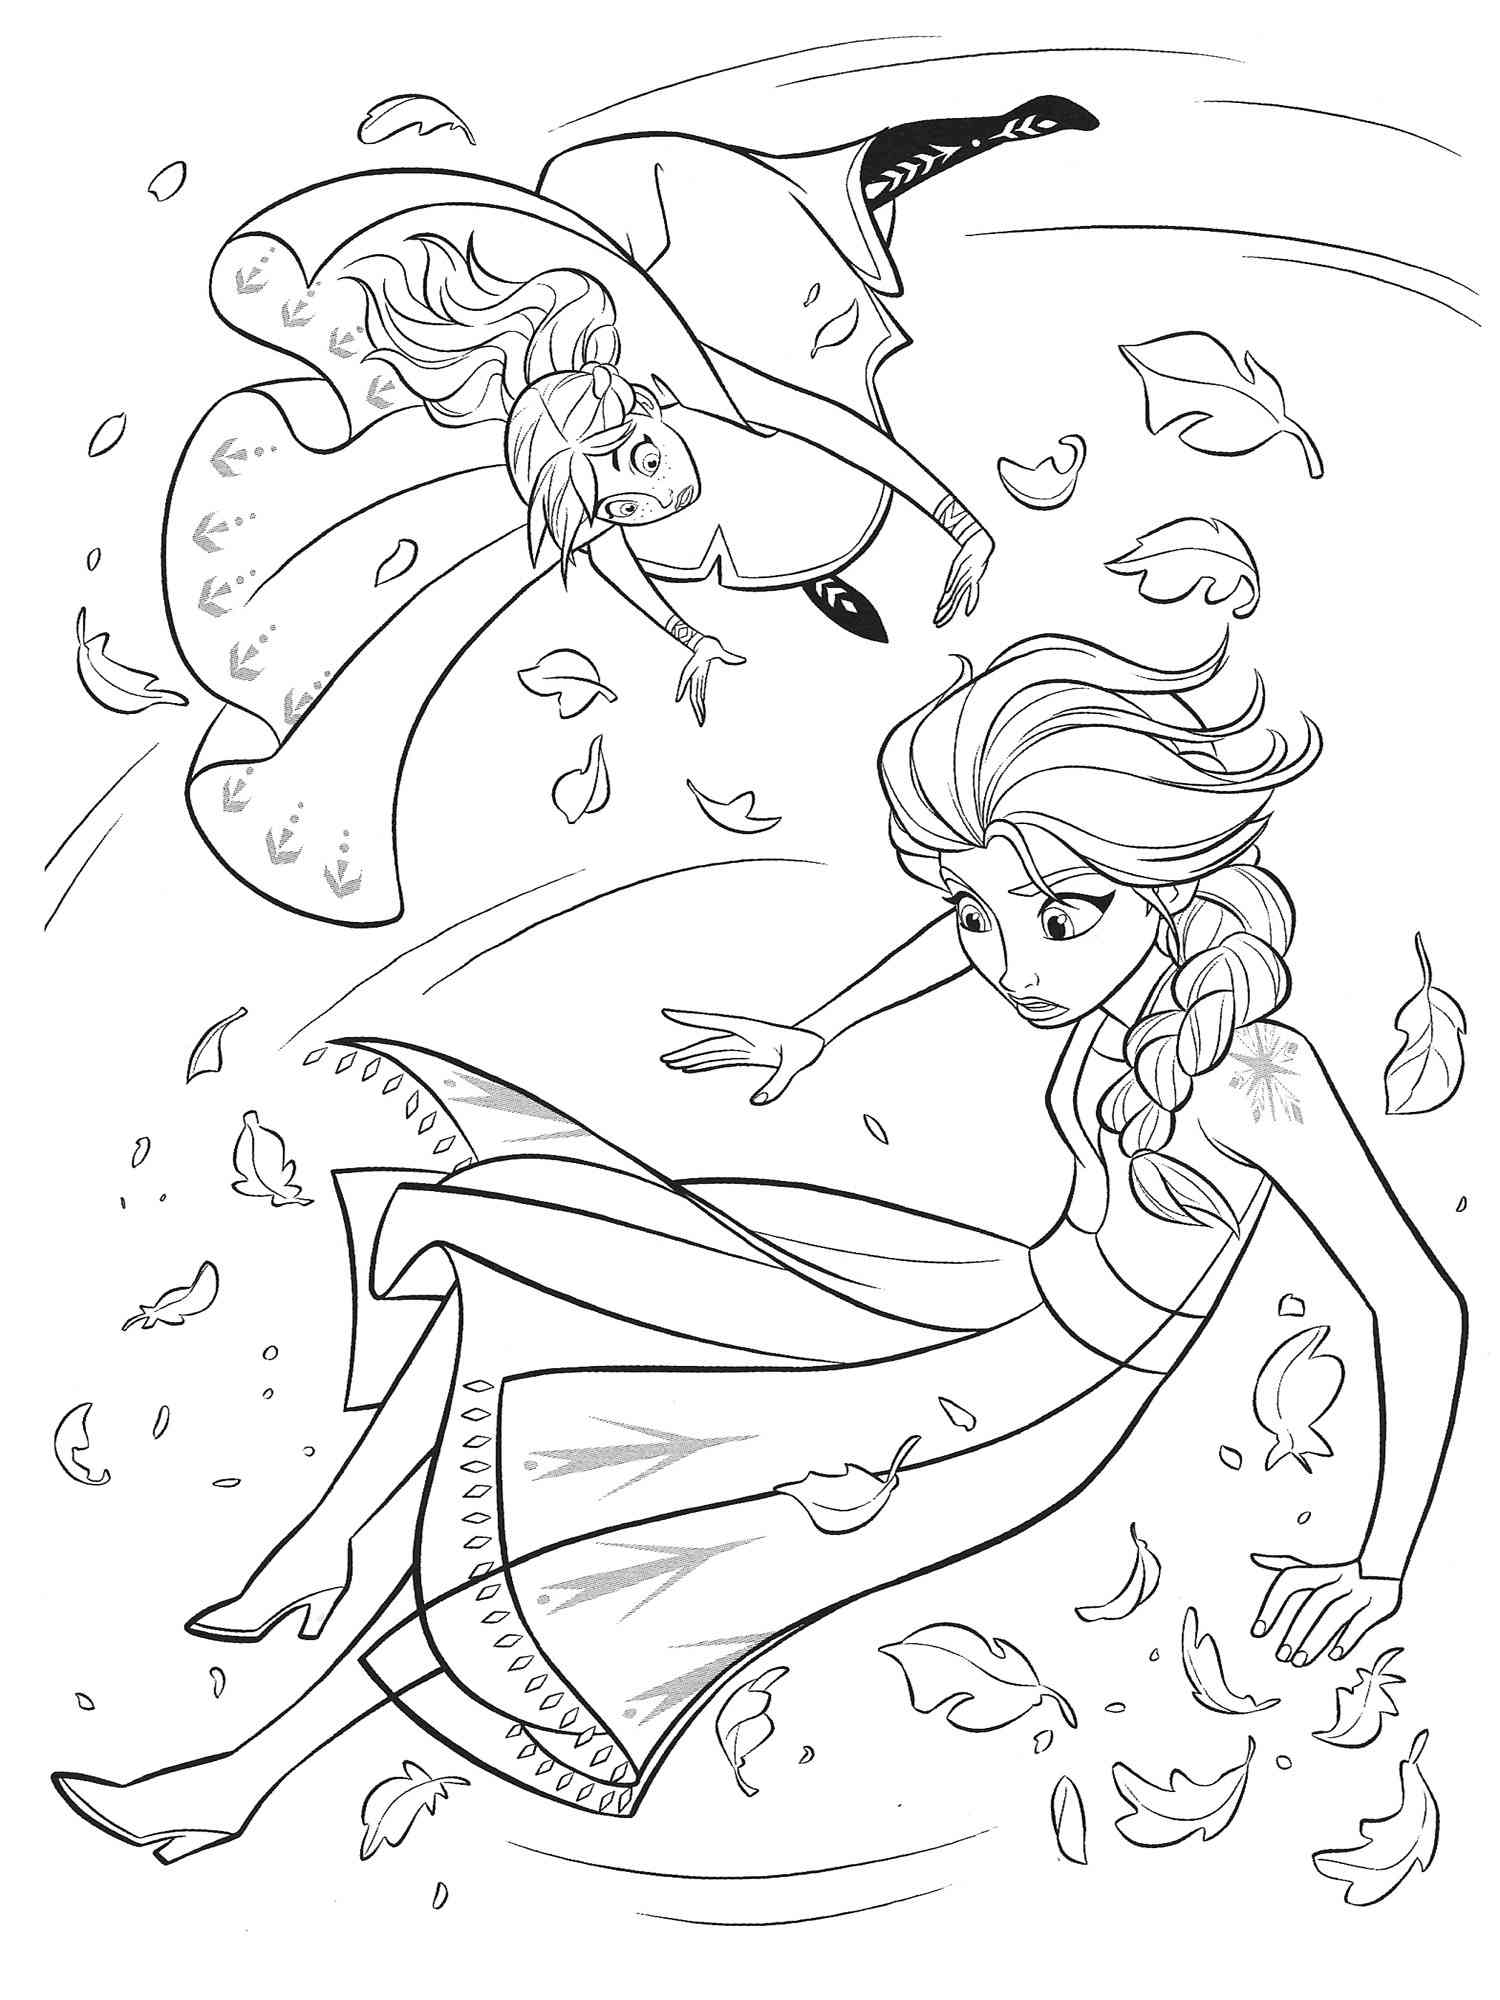 Frozen 21 coloring page